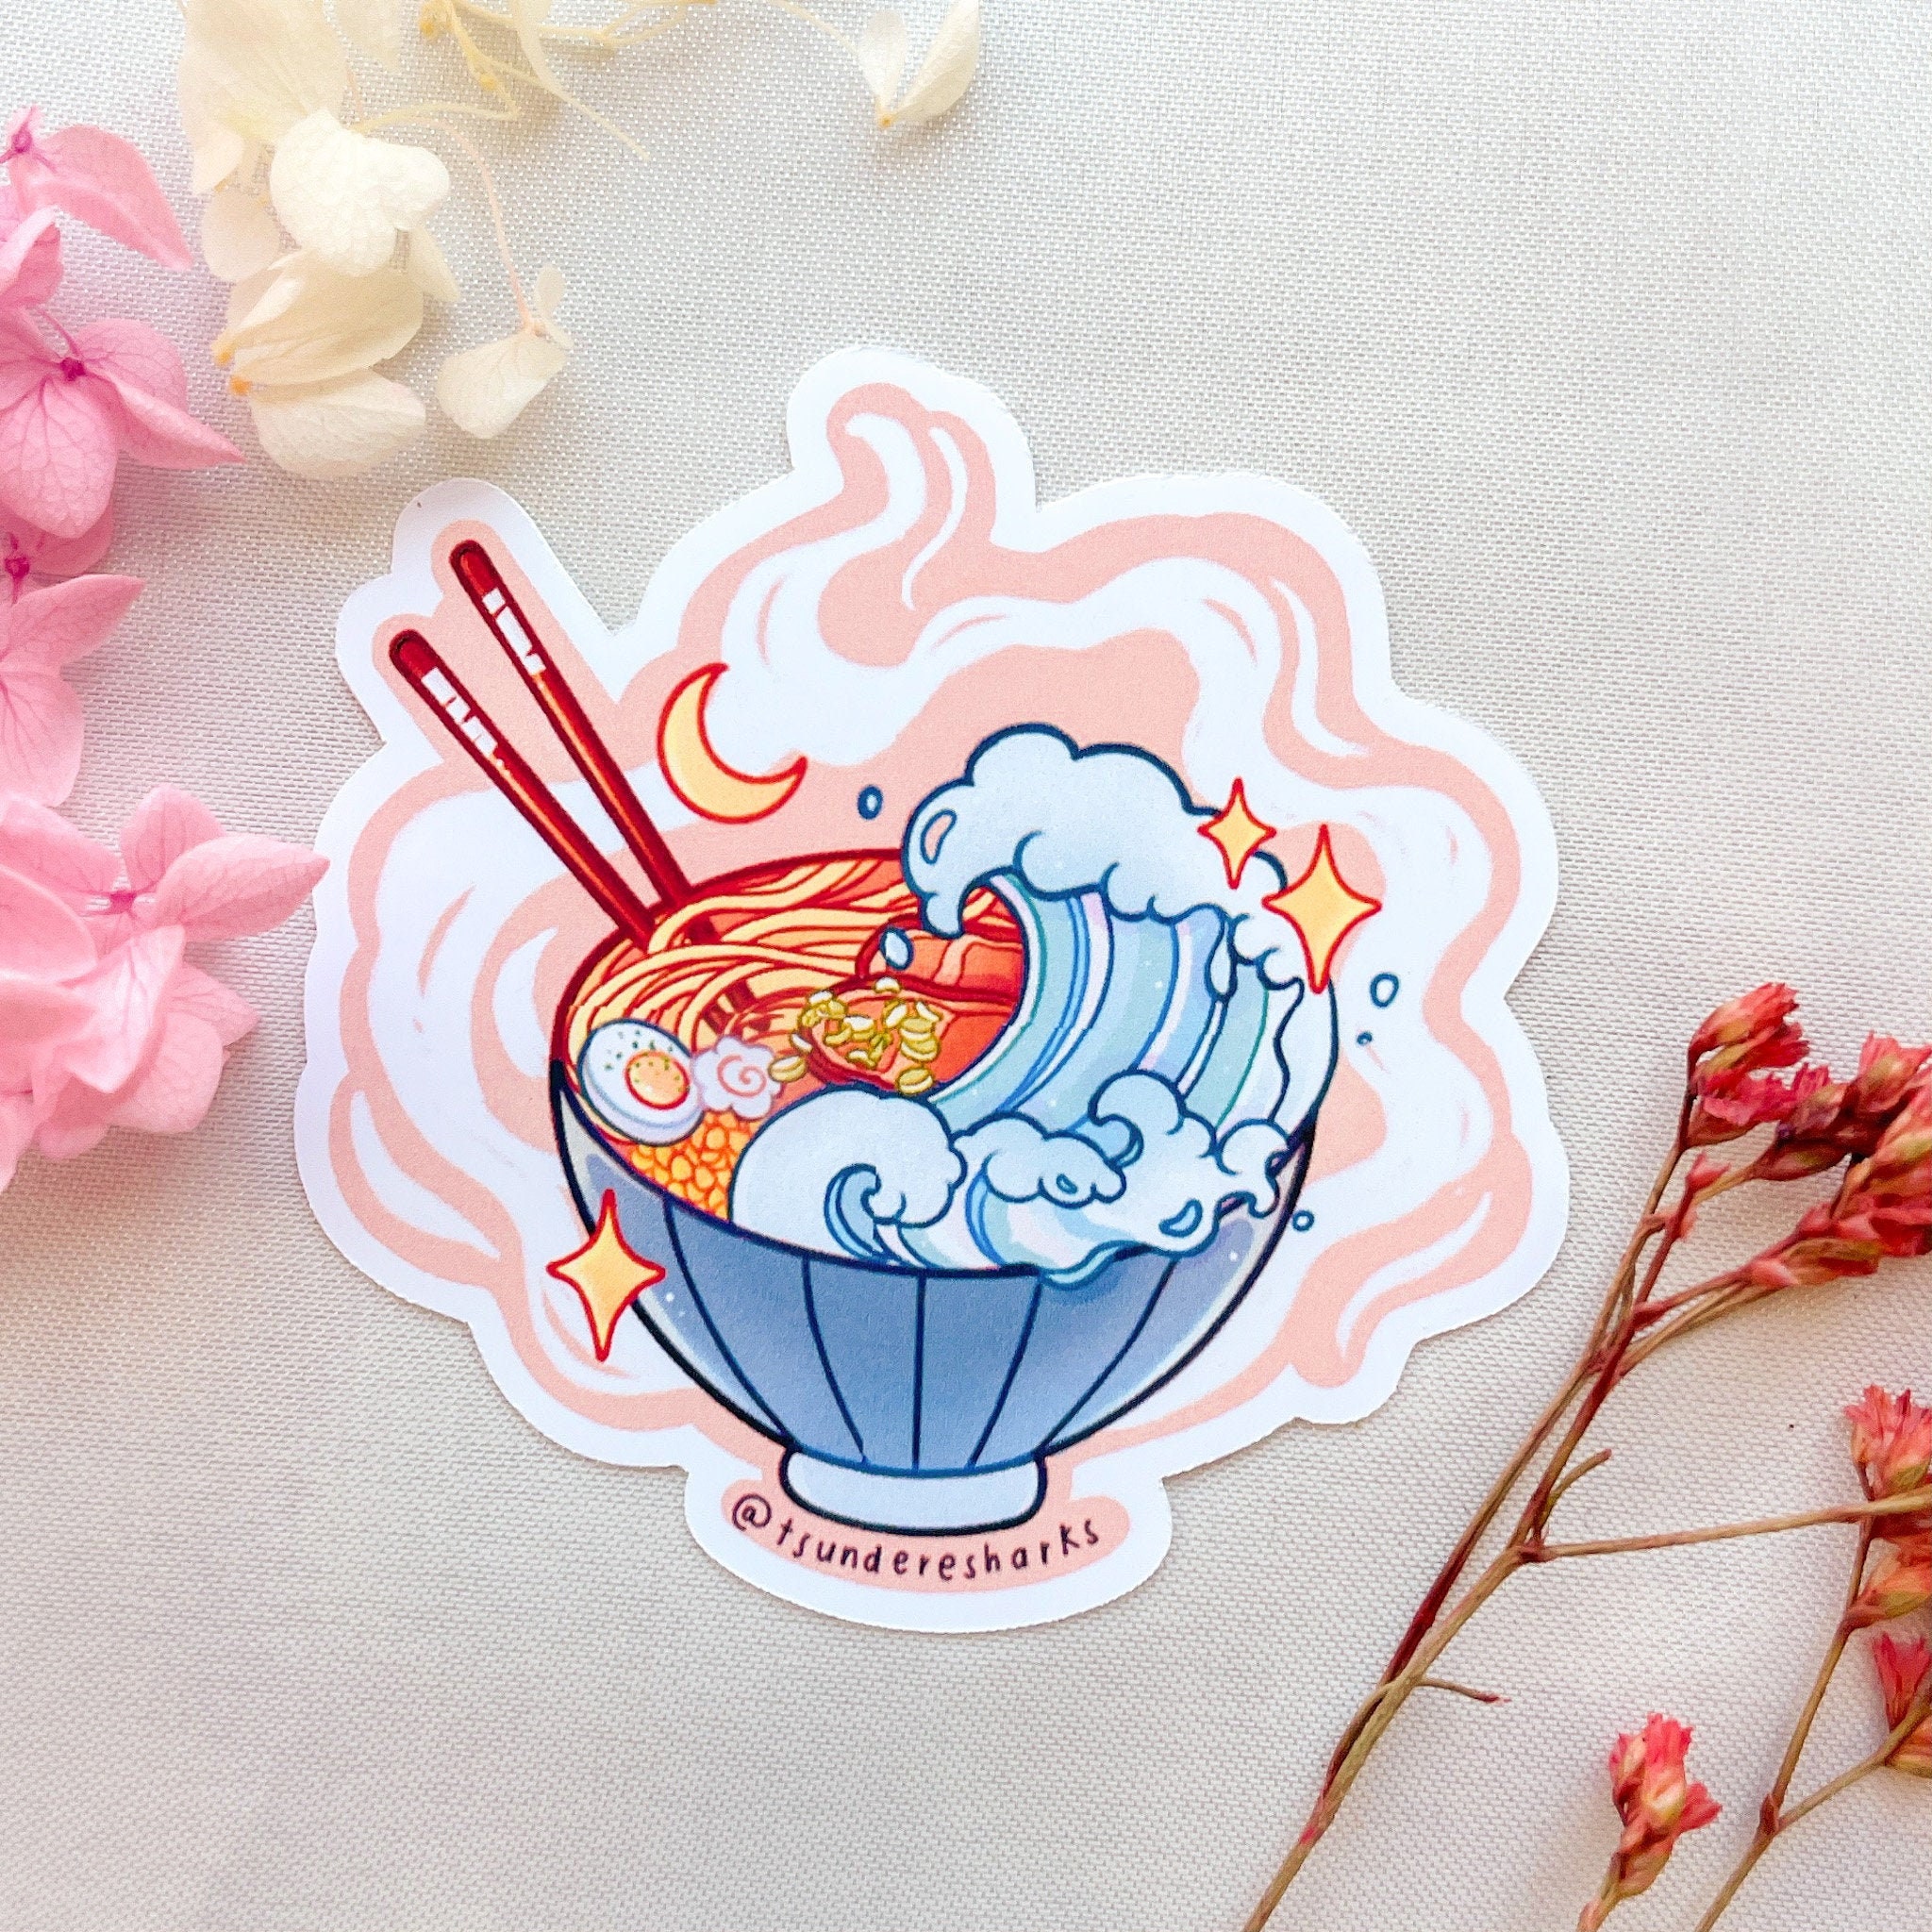 Ramen bowl on watercolor background Toppings include eggs slic by Ducka  House on Dribbble